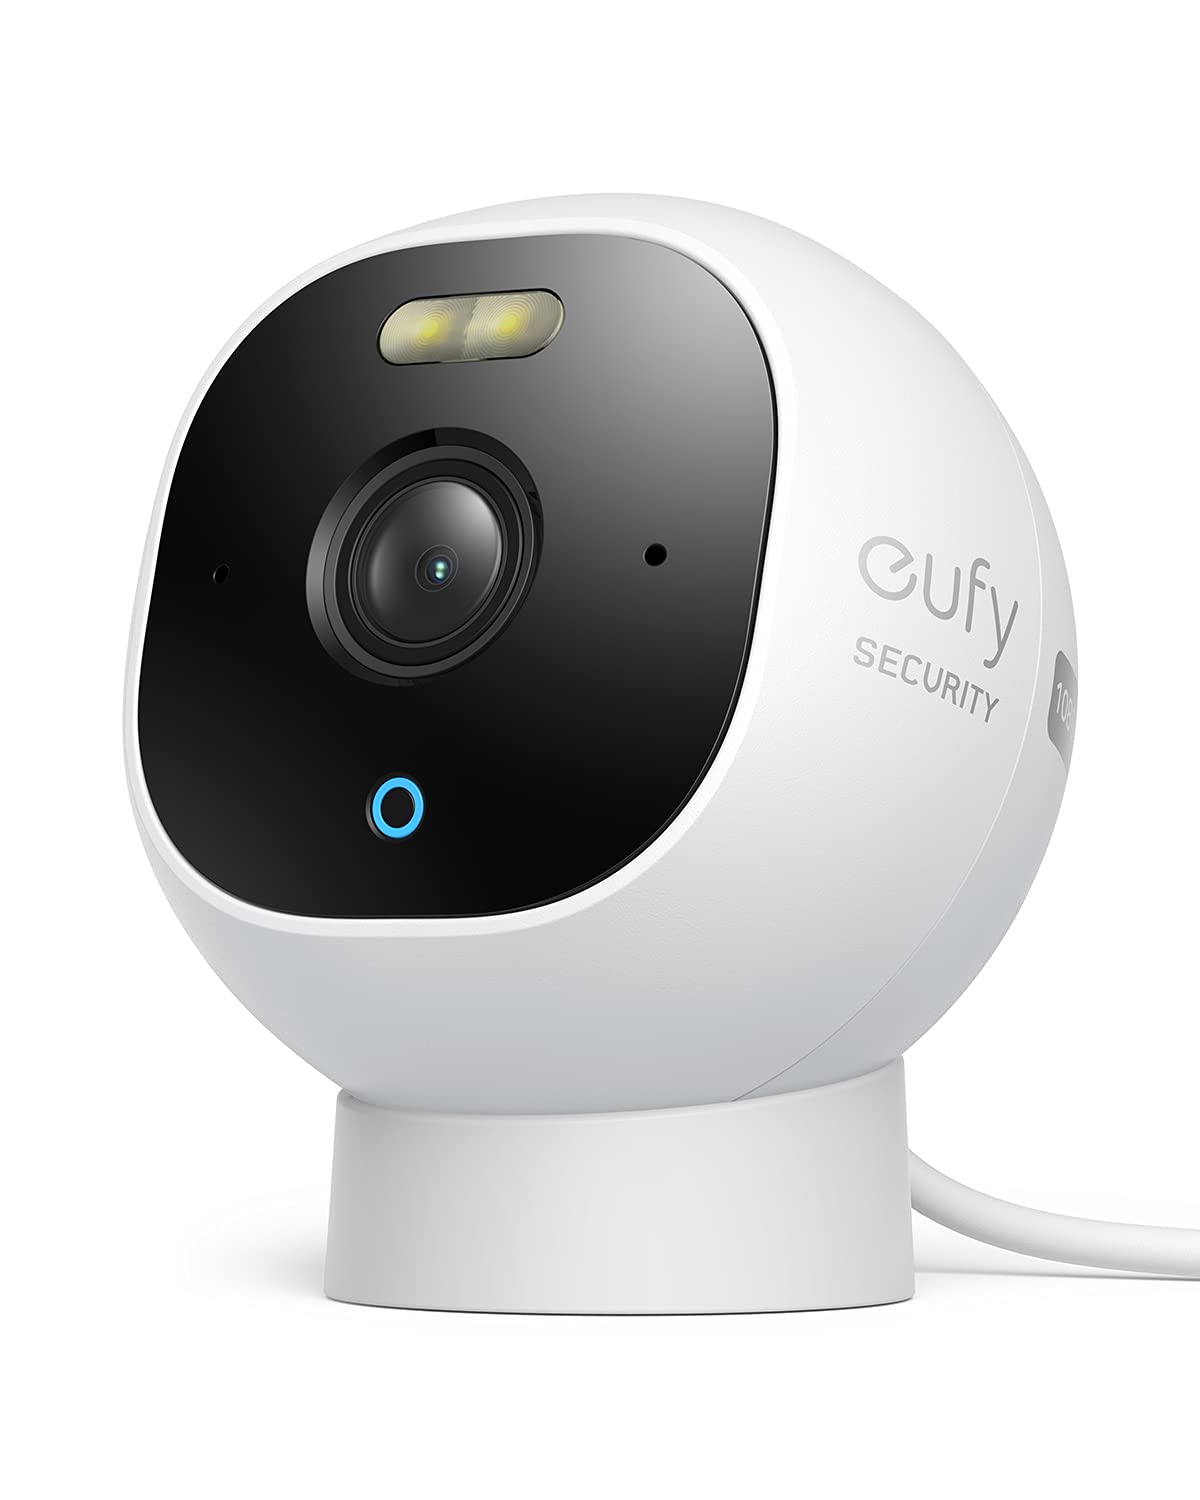 eufy Security All-in-One Outdoor Security Camera with 1080p Resolution For $59.99